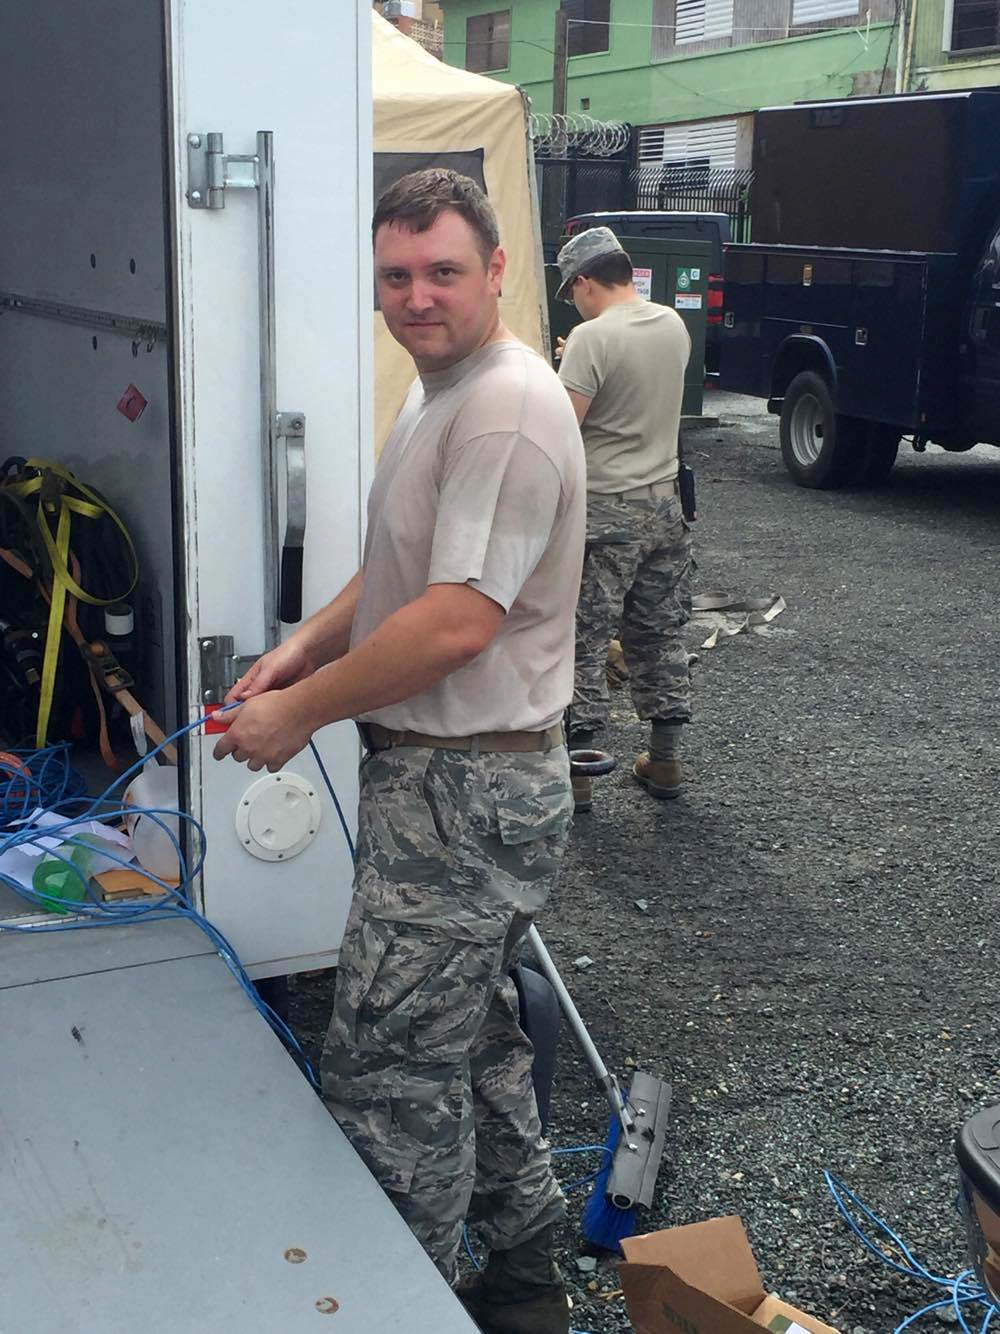 Tech. Sgt. Zach Ruoff, part of a six-person team from the 269th Combat Communications Squadron, Springfield Ohio Air National Guard Base, prepares cables to extend communications services to St. Thomas, U.S. Virgin Islands in the aftermath of Hurricane Ma